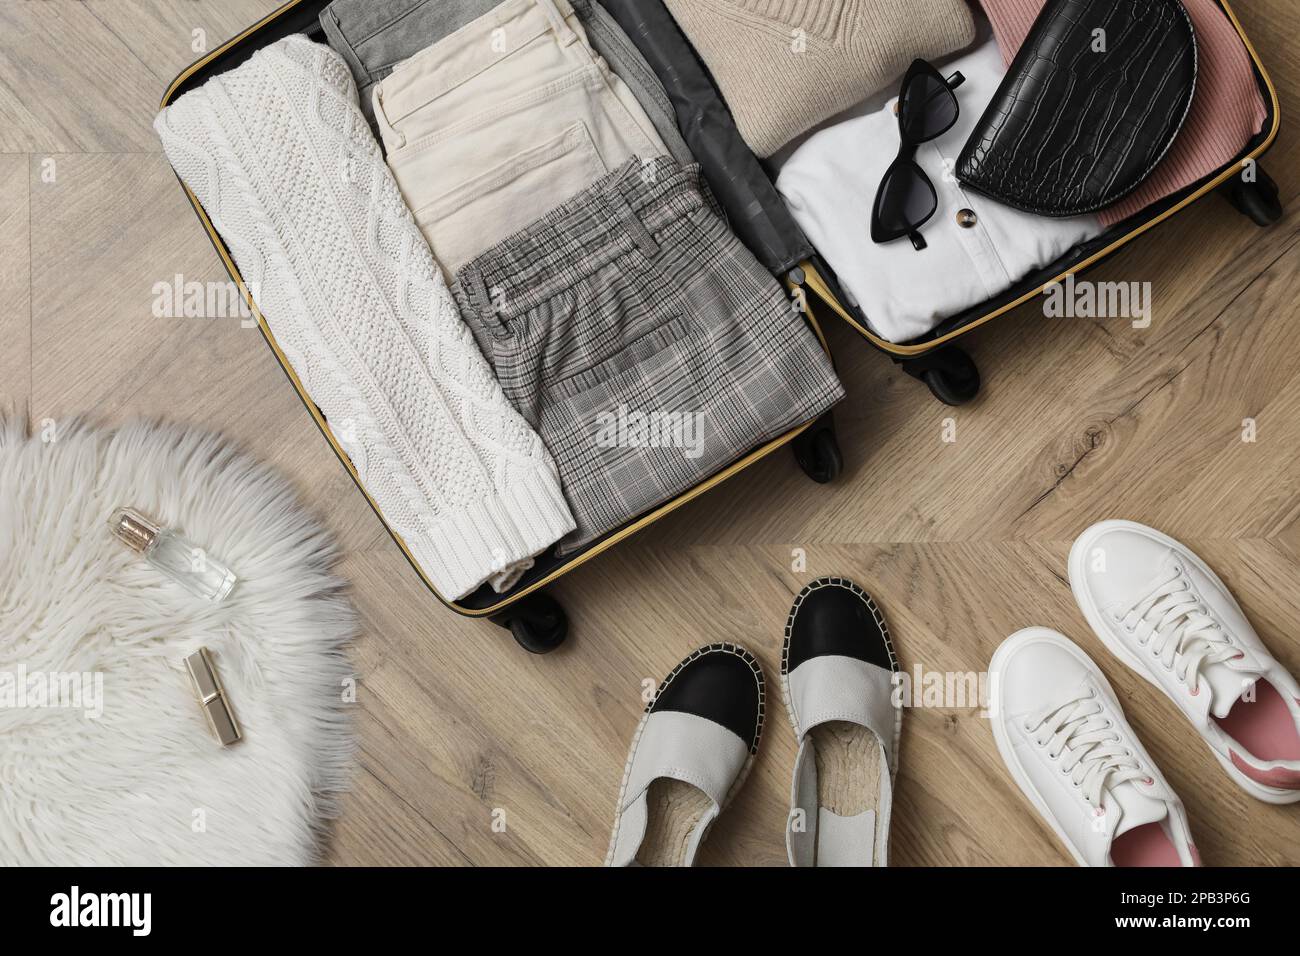 https://c8.alamy.com/comp/2PB3P6G/open-suitcase-with-folded-clothes-accessories-and-shoes-on-floor-flat-lay-2PB3P6G.jpg